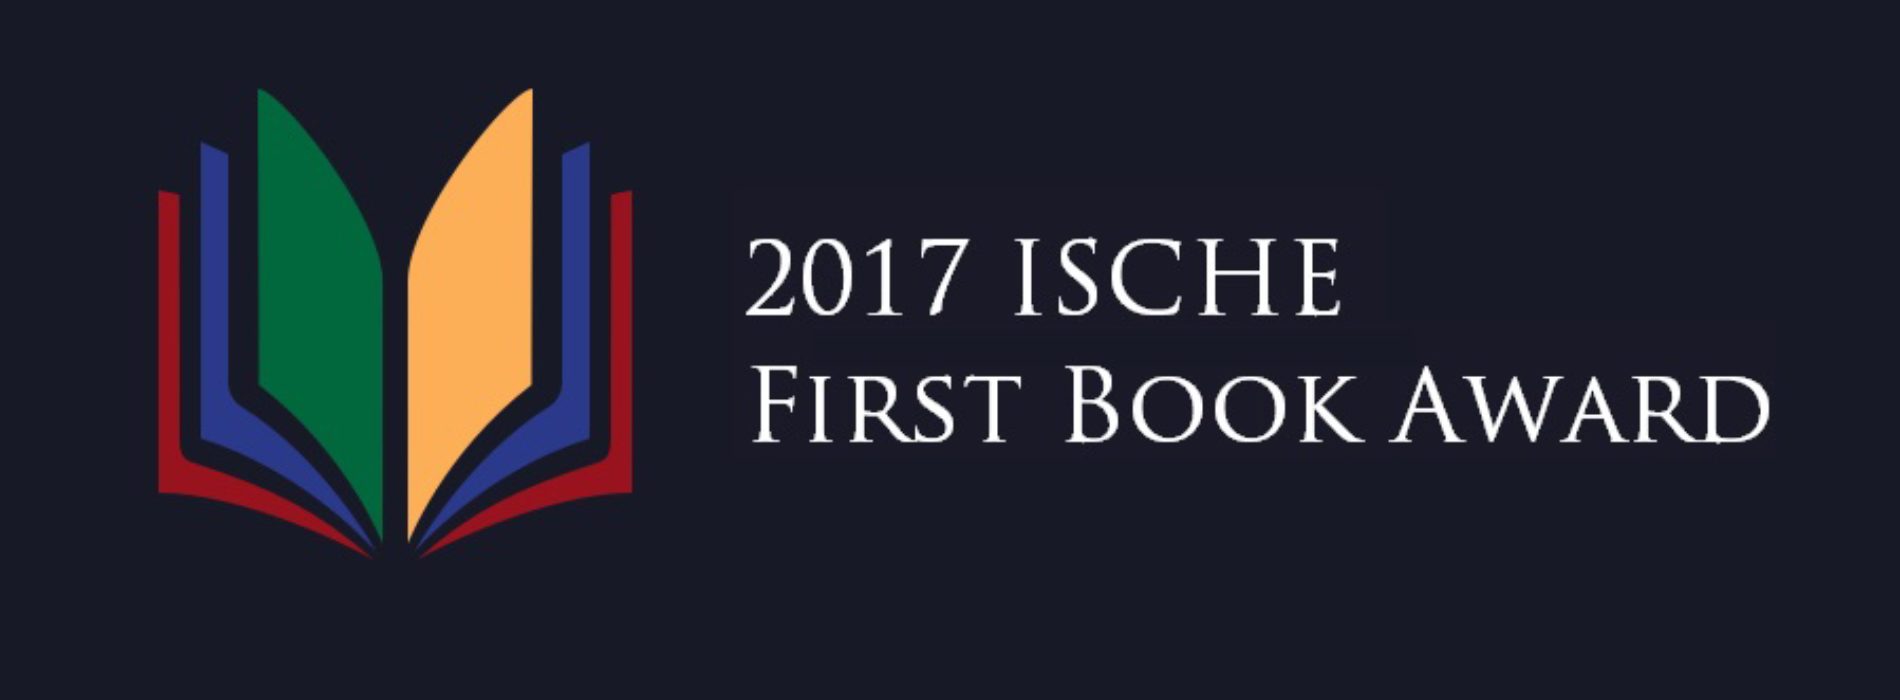 Request for submissions: 2017 ISCHE First Book Award (Deadline: Oct. 1, 2016)